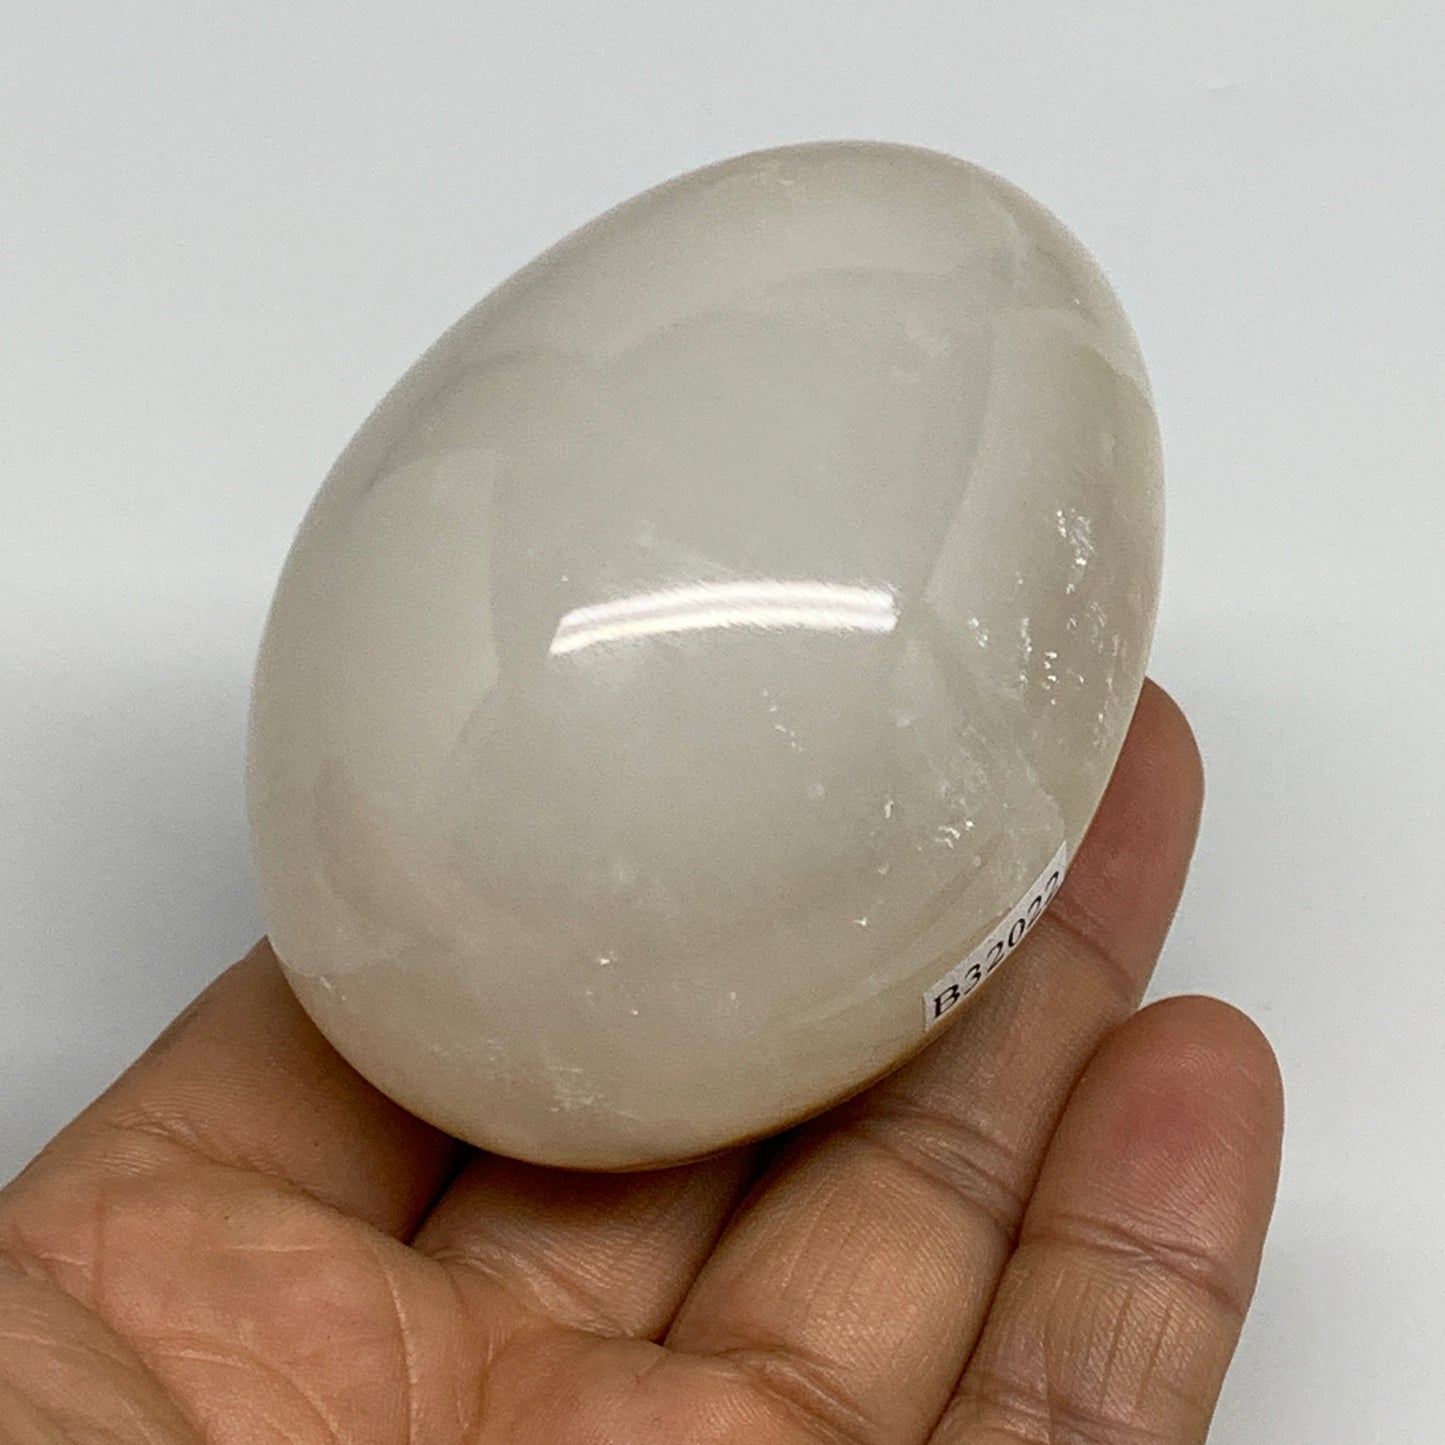 261g, 2.8"x2" Natural Green Onyx Egg Gemstone Mineral, from Pakistan, B32022